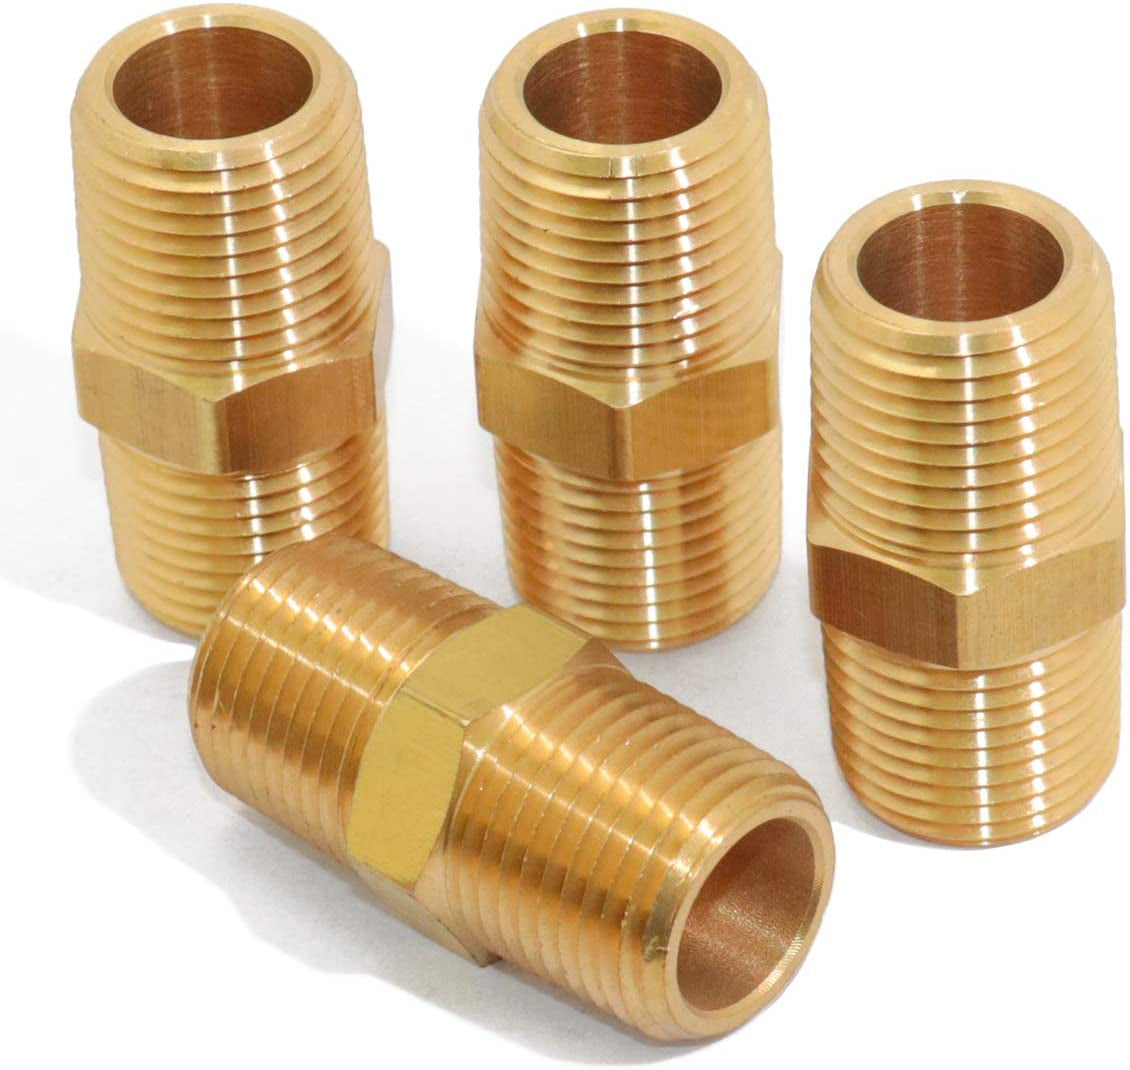 KOOTANS, KOOTANS 4Pcs 1/4" NPT Male to 1/4" NPT Male Pipe Adapter Brass Pipe Fitting, Hex Nipple Fast Coupler Fitting